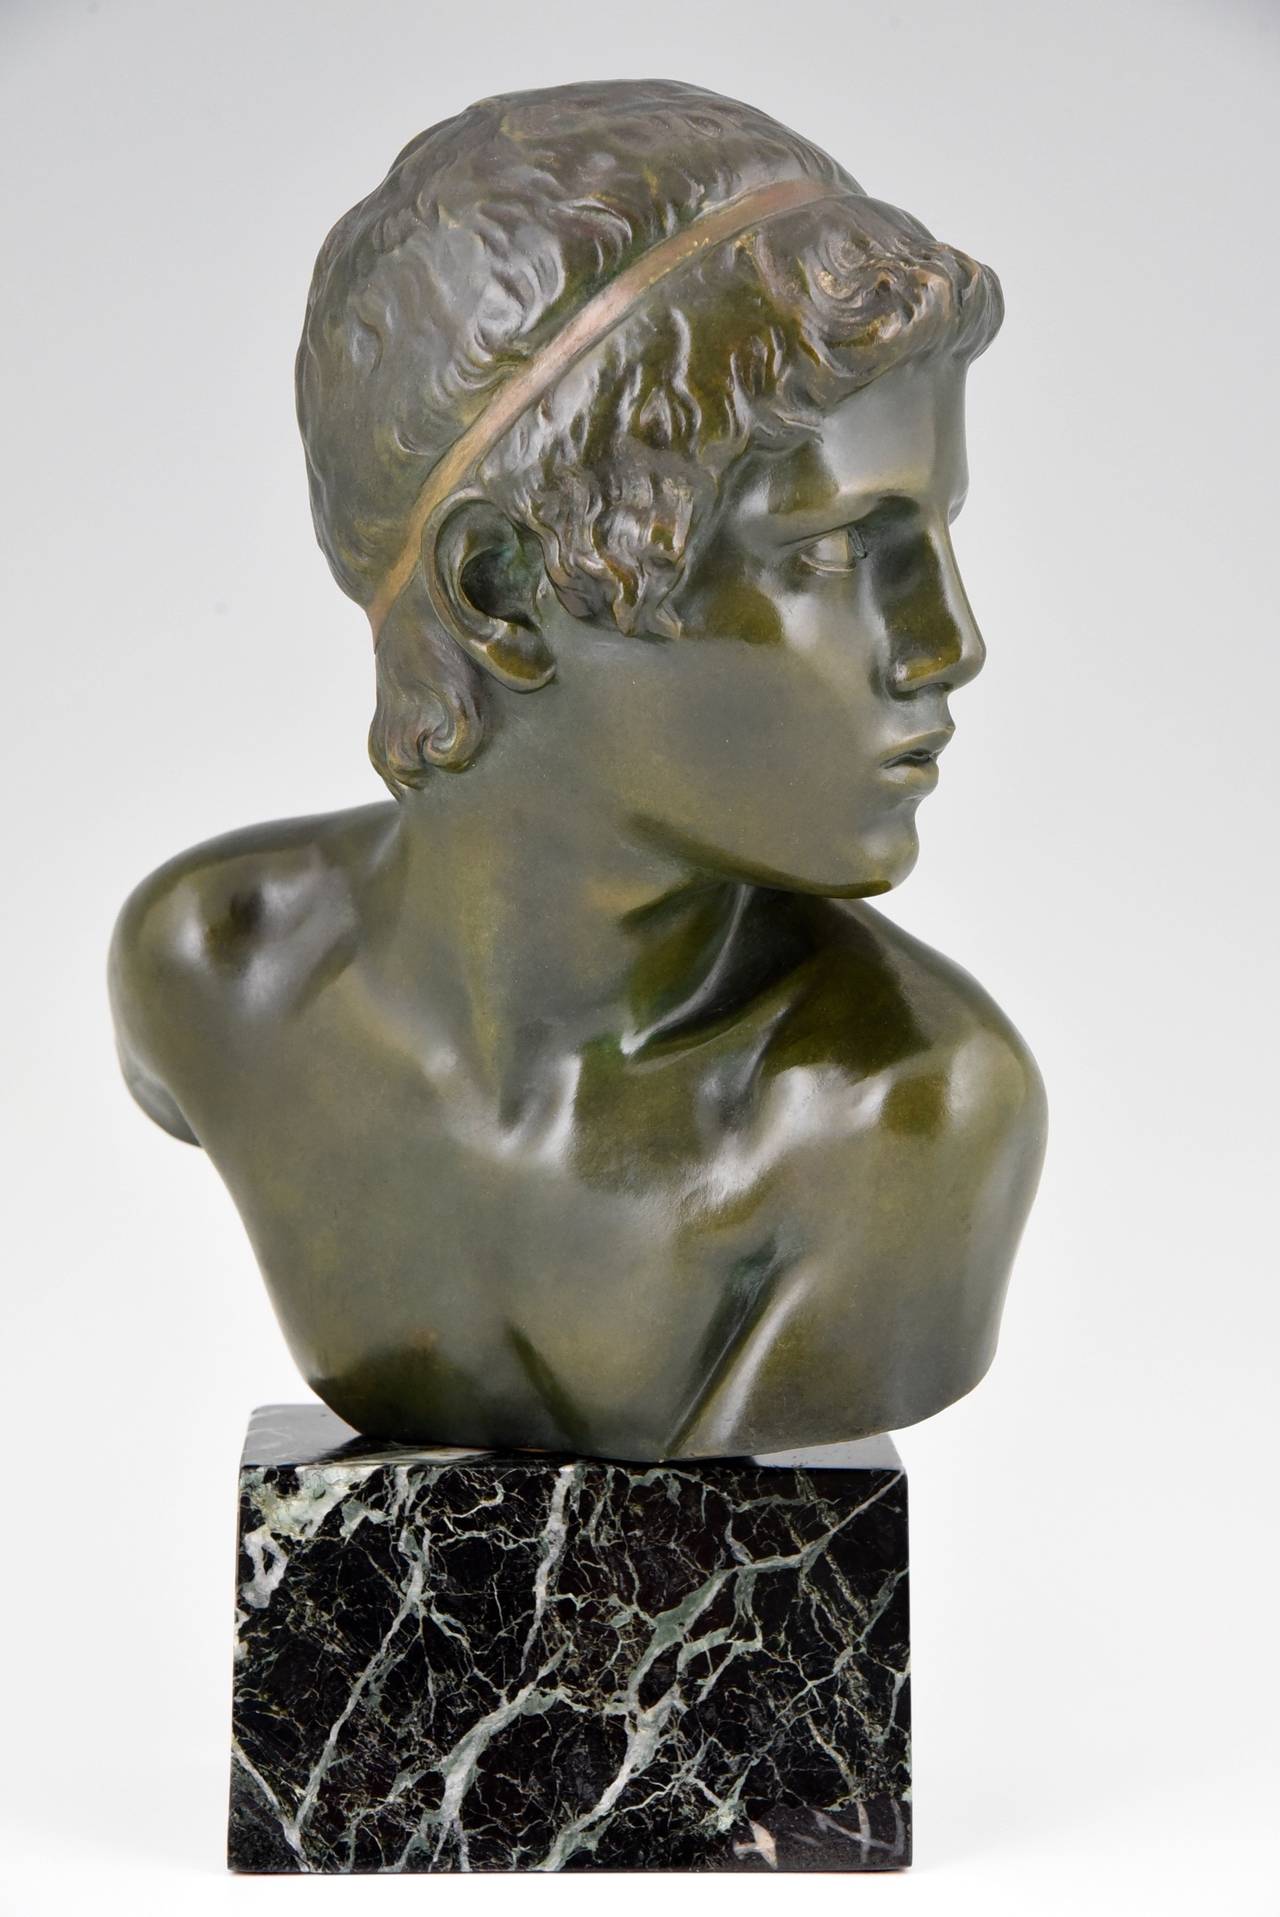 Art Deco bronze bust of the young Achilles. 
By  Constant Roux (1865-1929)
Signature & Marks: 
Constant Roux, numbered.  
Foundry seal Les Neveux de J. Lehmann.
Style: Art deco.
Date: 1920.
Material:  Bronze on a green marble base.  The